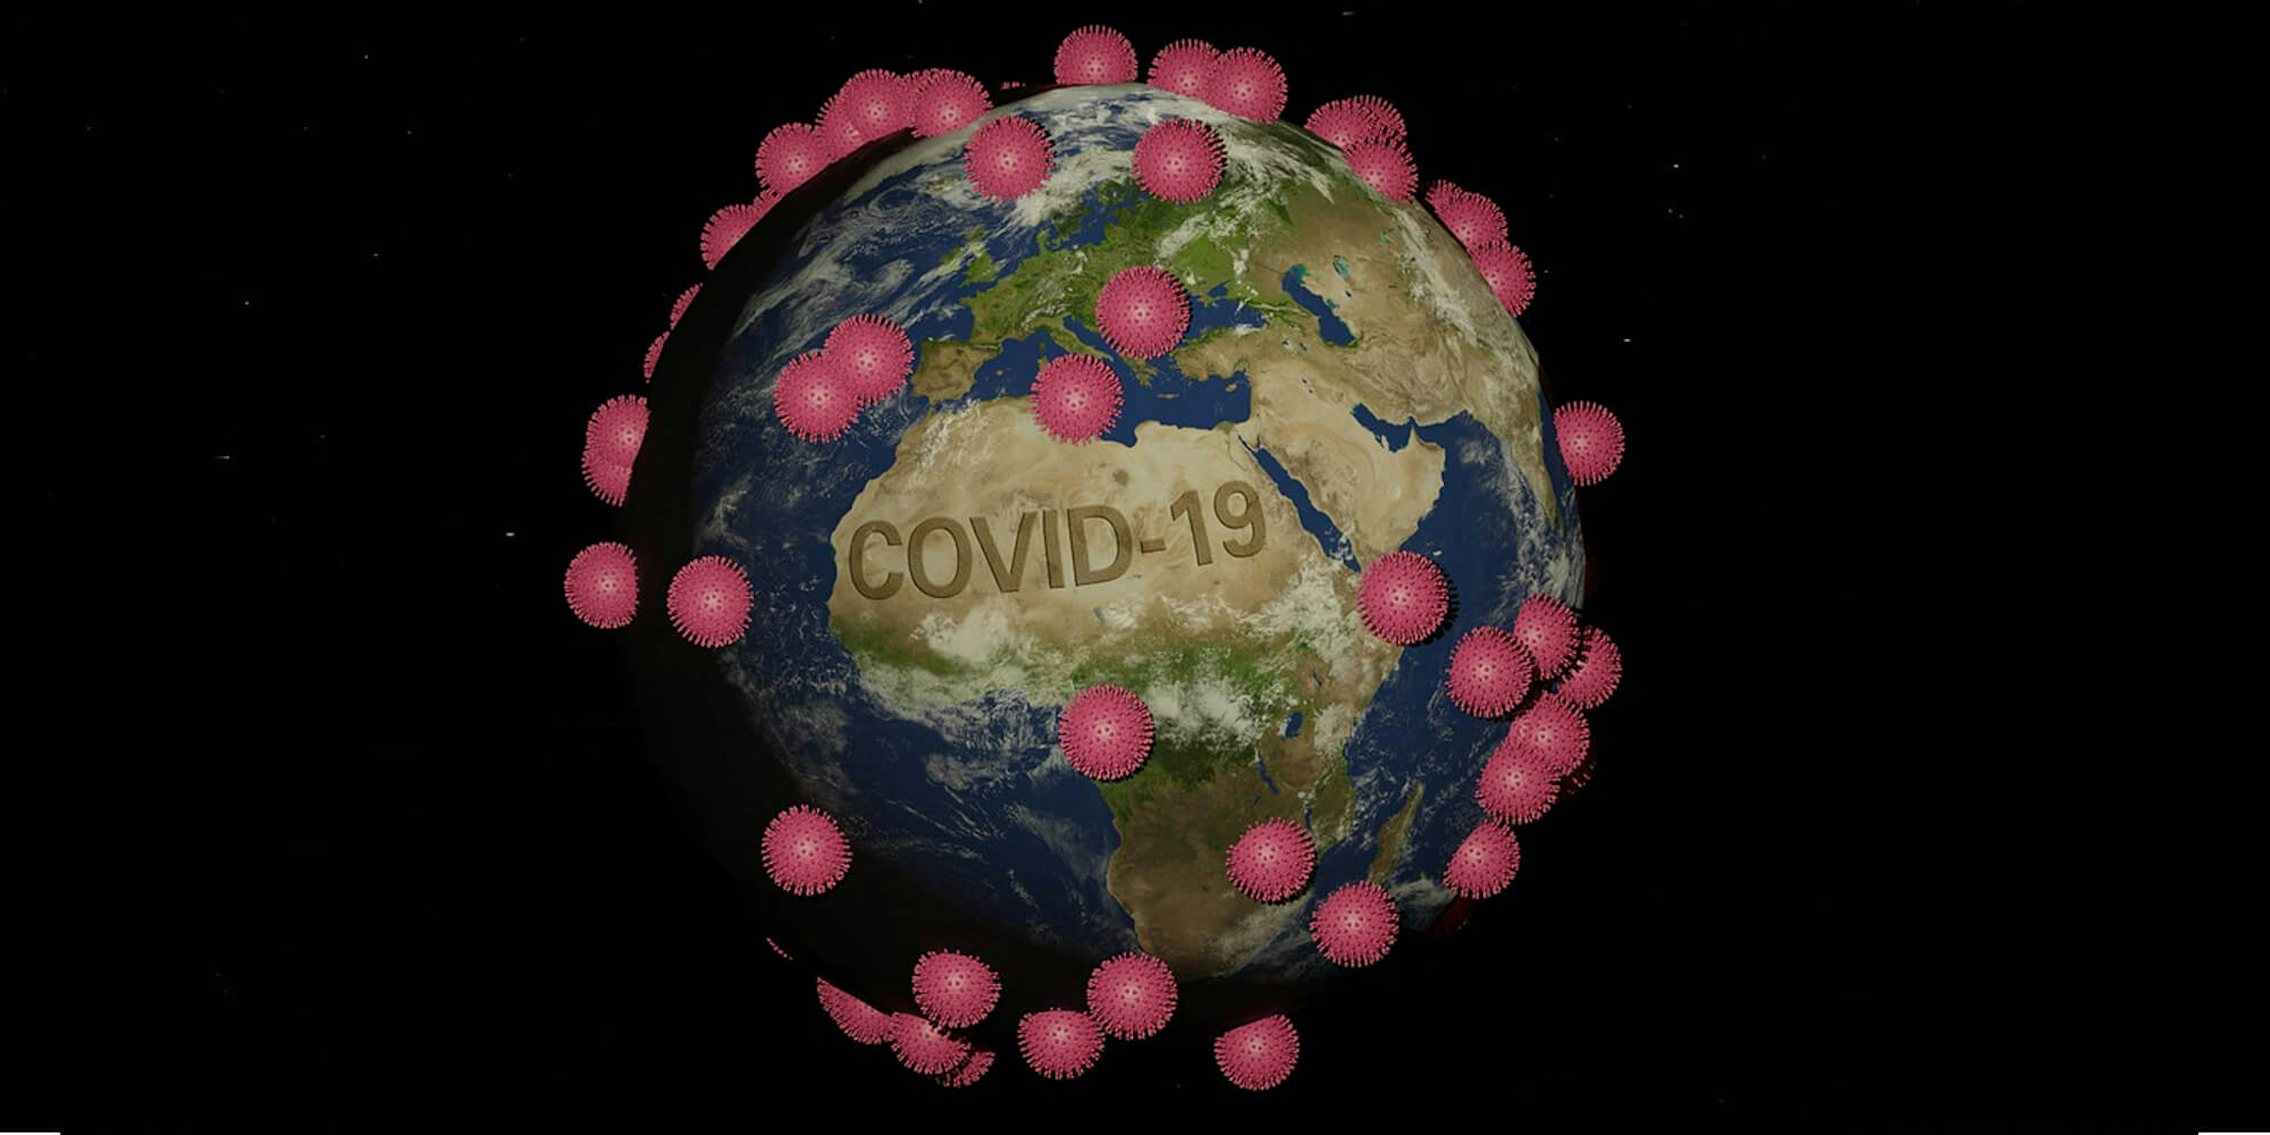 The world covered in red spots with the word COVID-19